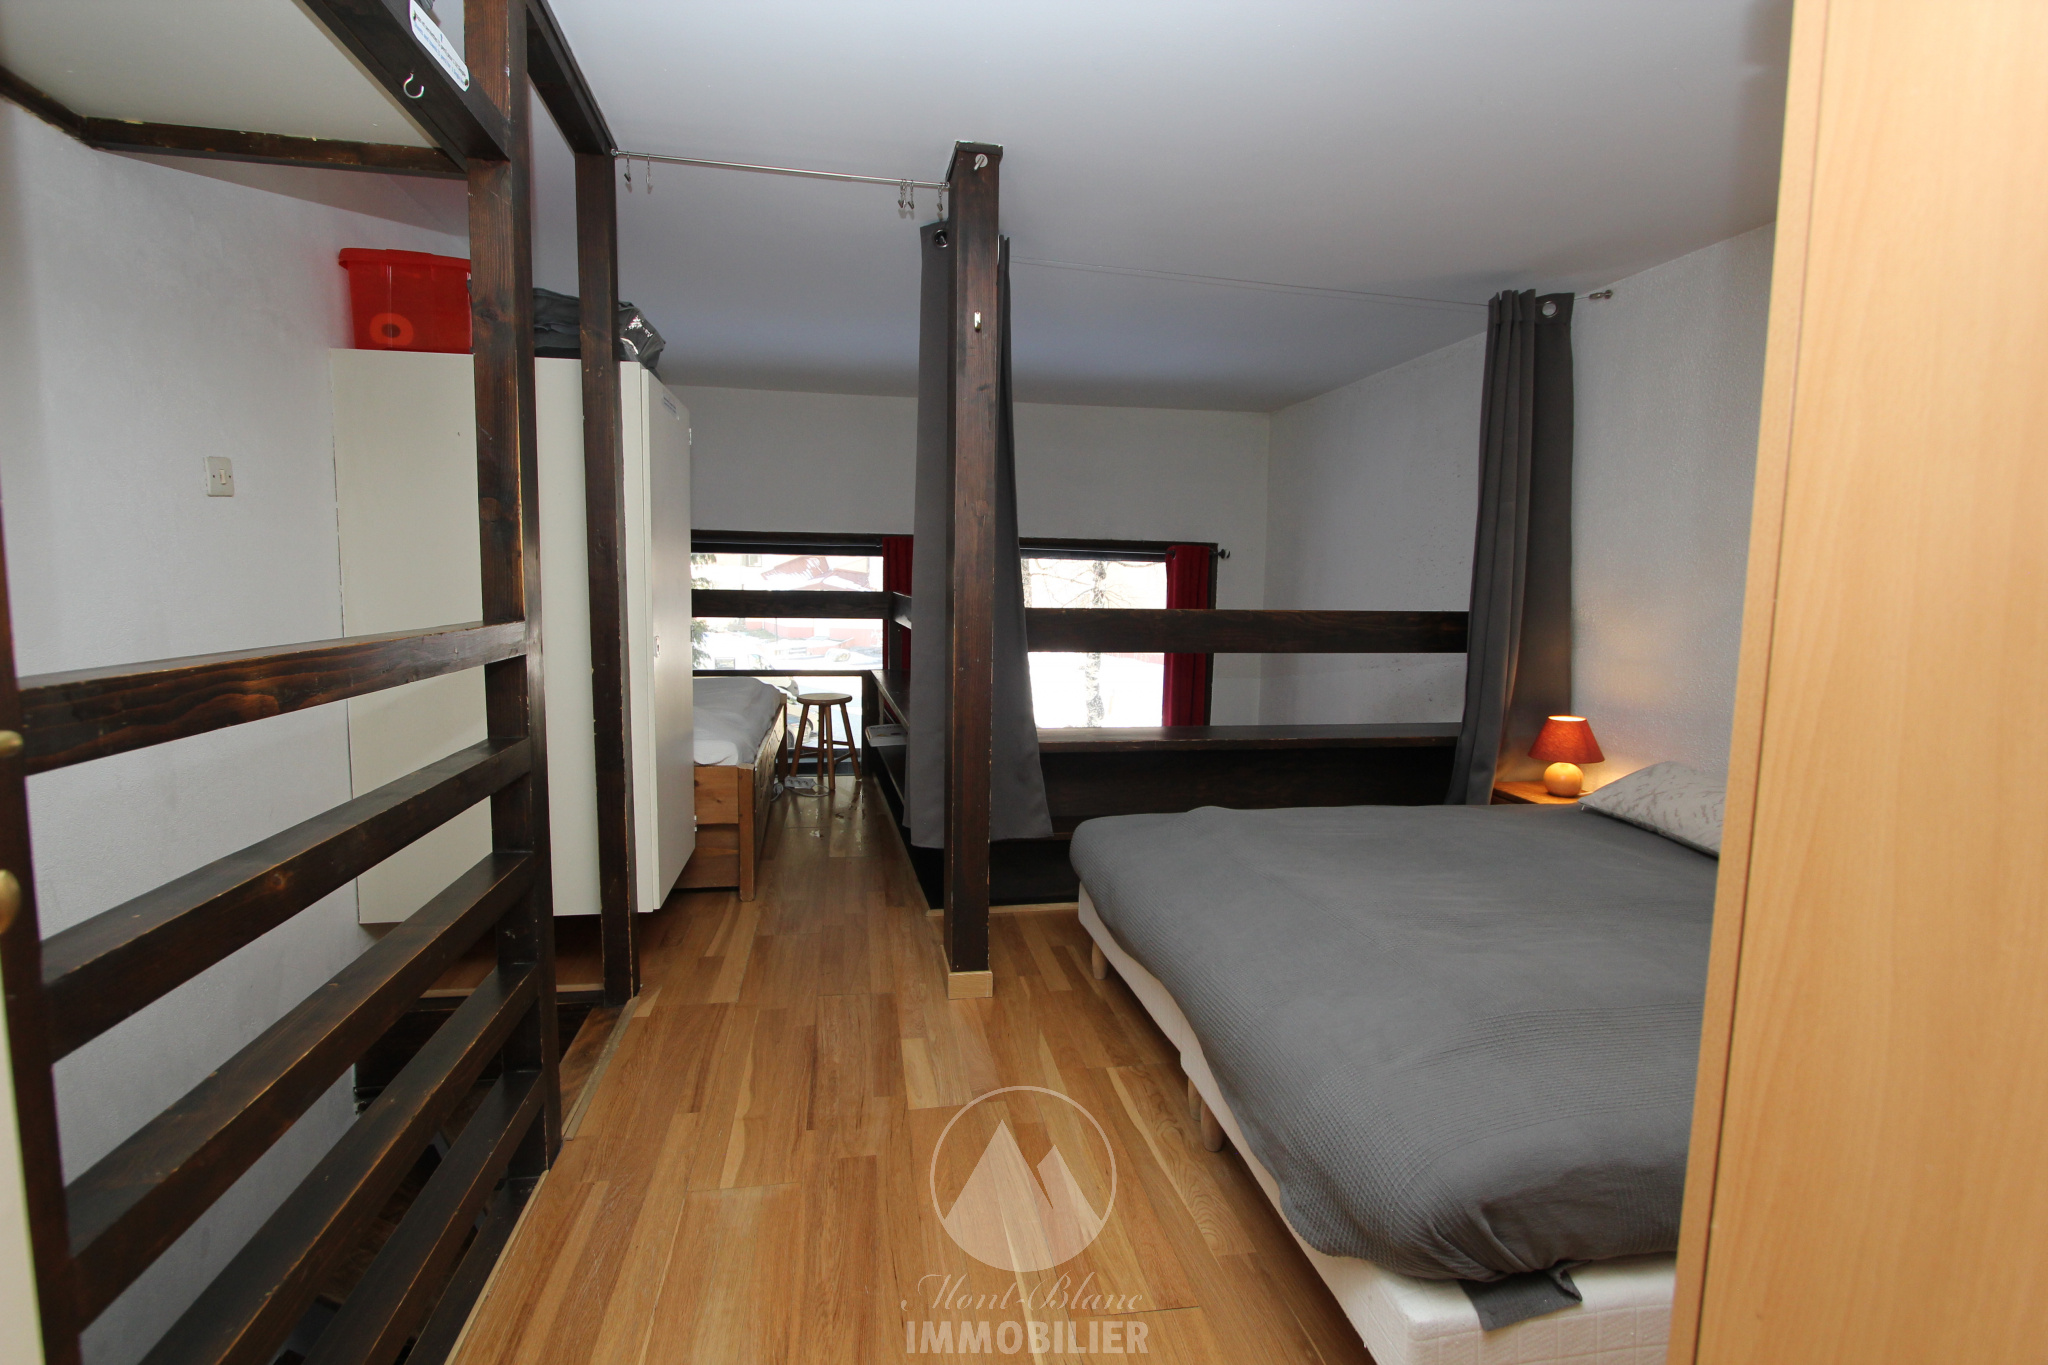 Photo of For sale for investors in Chamonix-Mont-Blanc (74): duplex